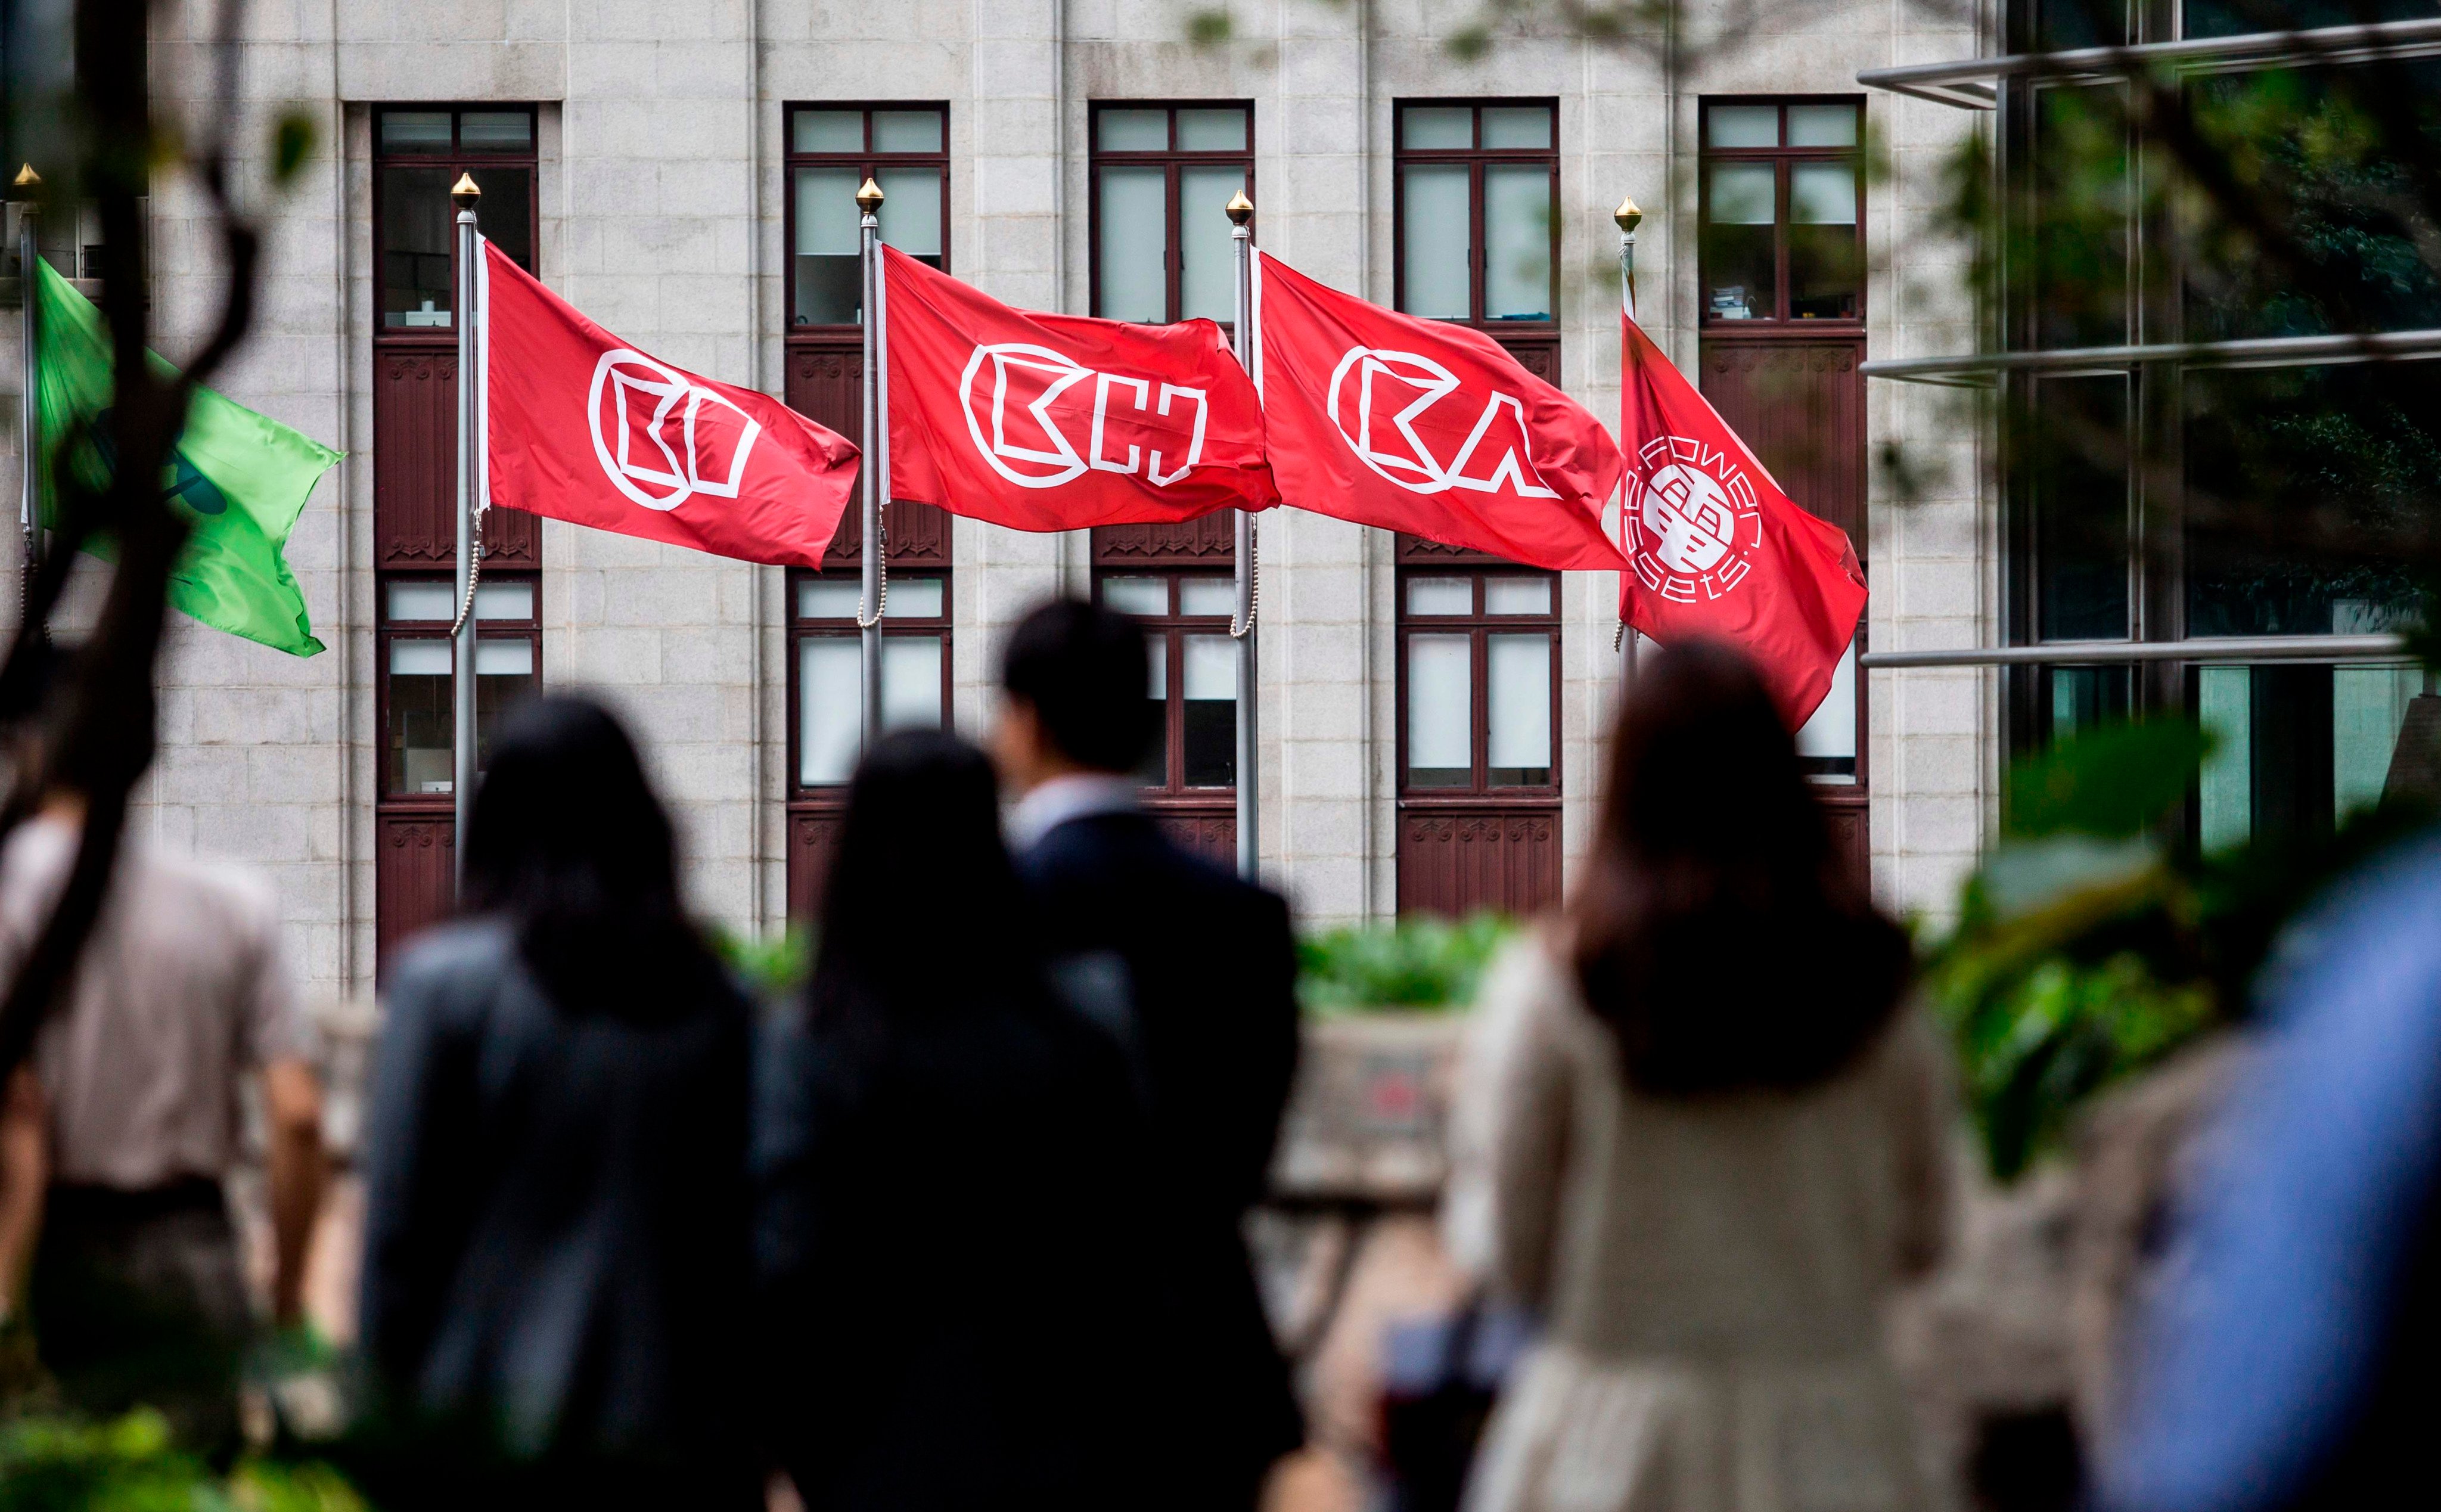 People walk near flags of CK Hutchinson Holdings outside the company’s headquarters in Hong Kong on March 21, 2019. Photo: AFP